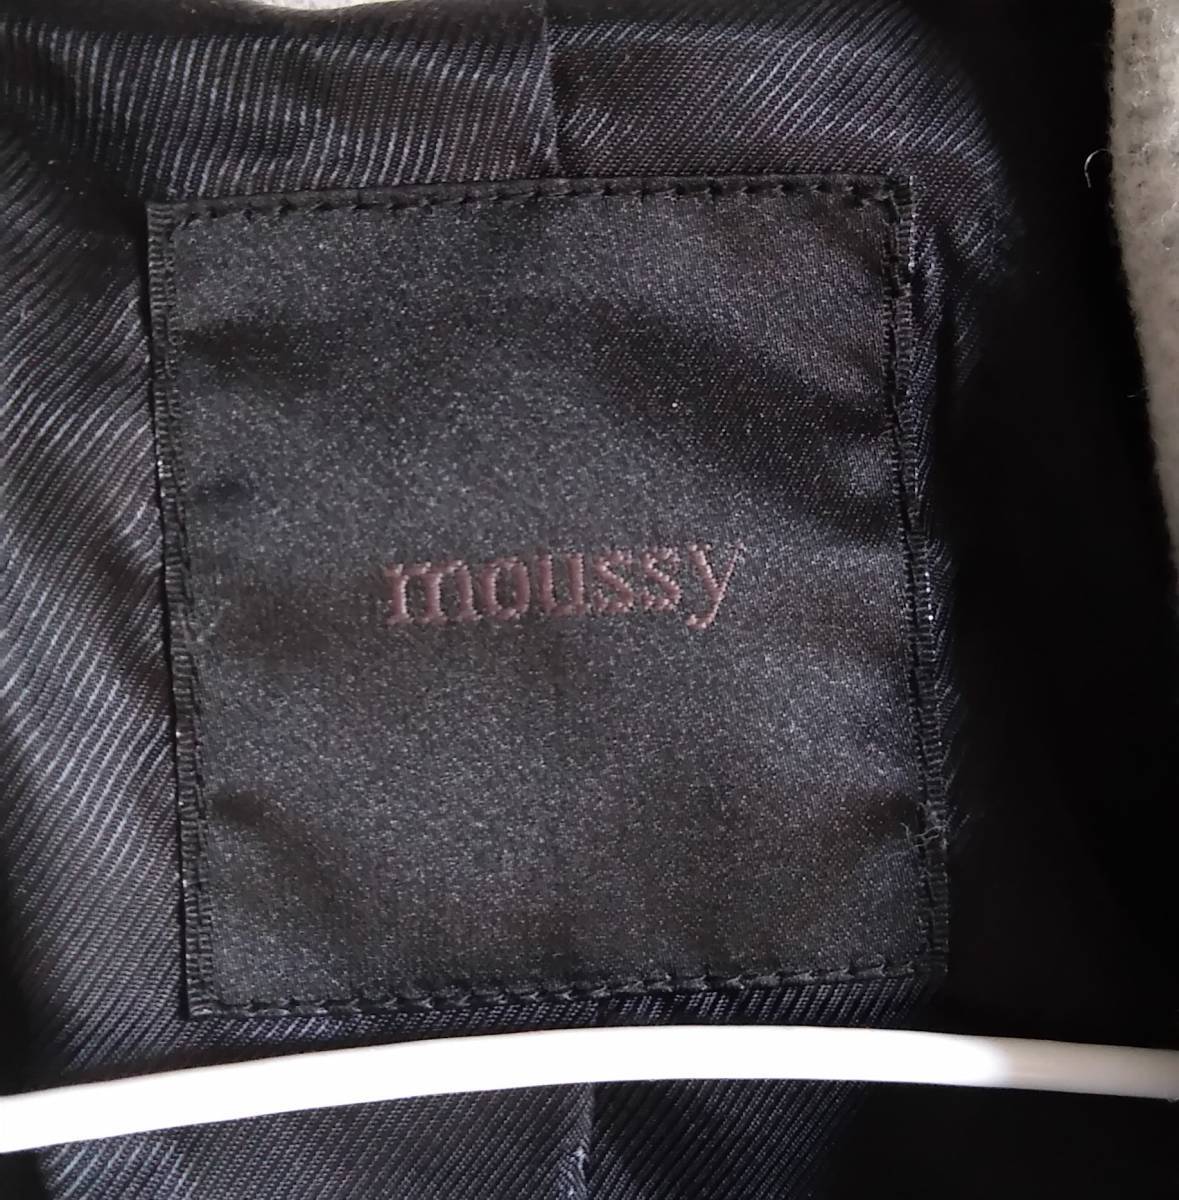  Moussy moussy wool jacket size 1 tailored double bo tang re-